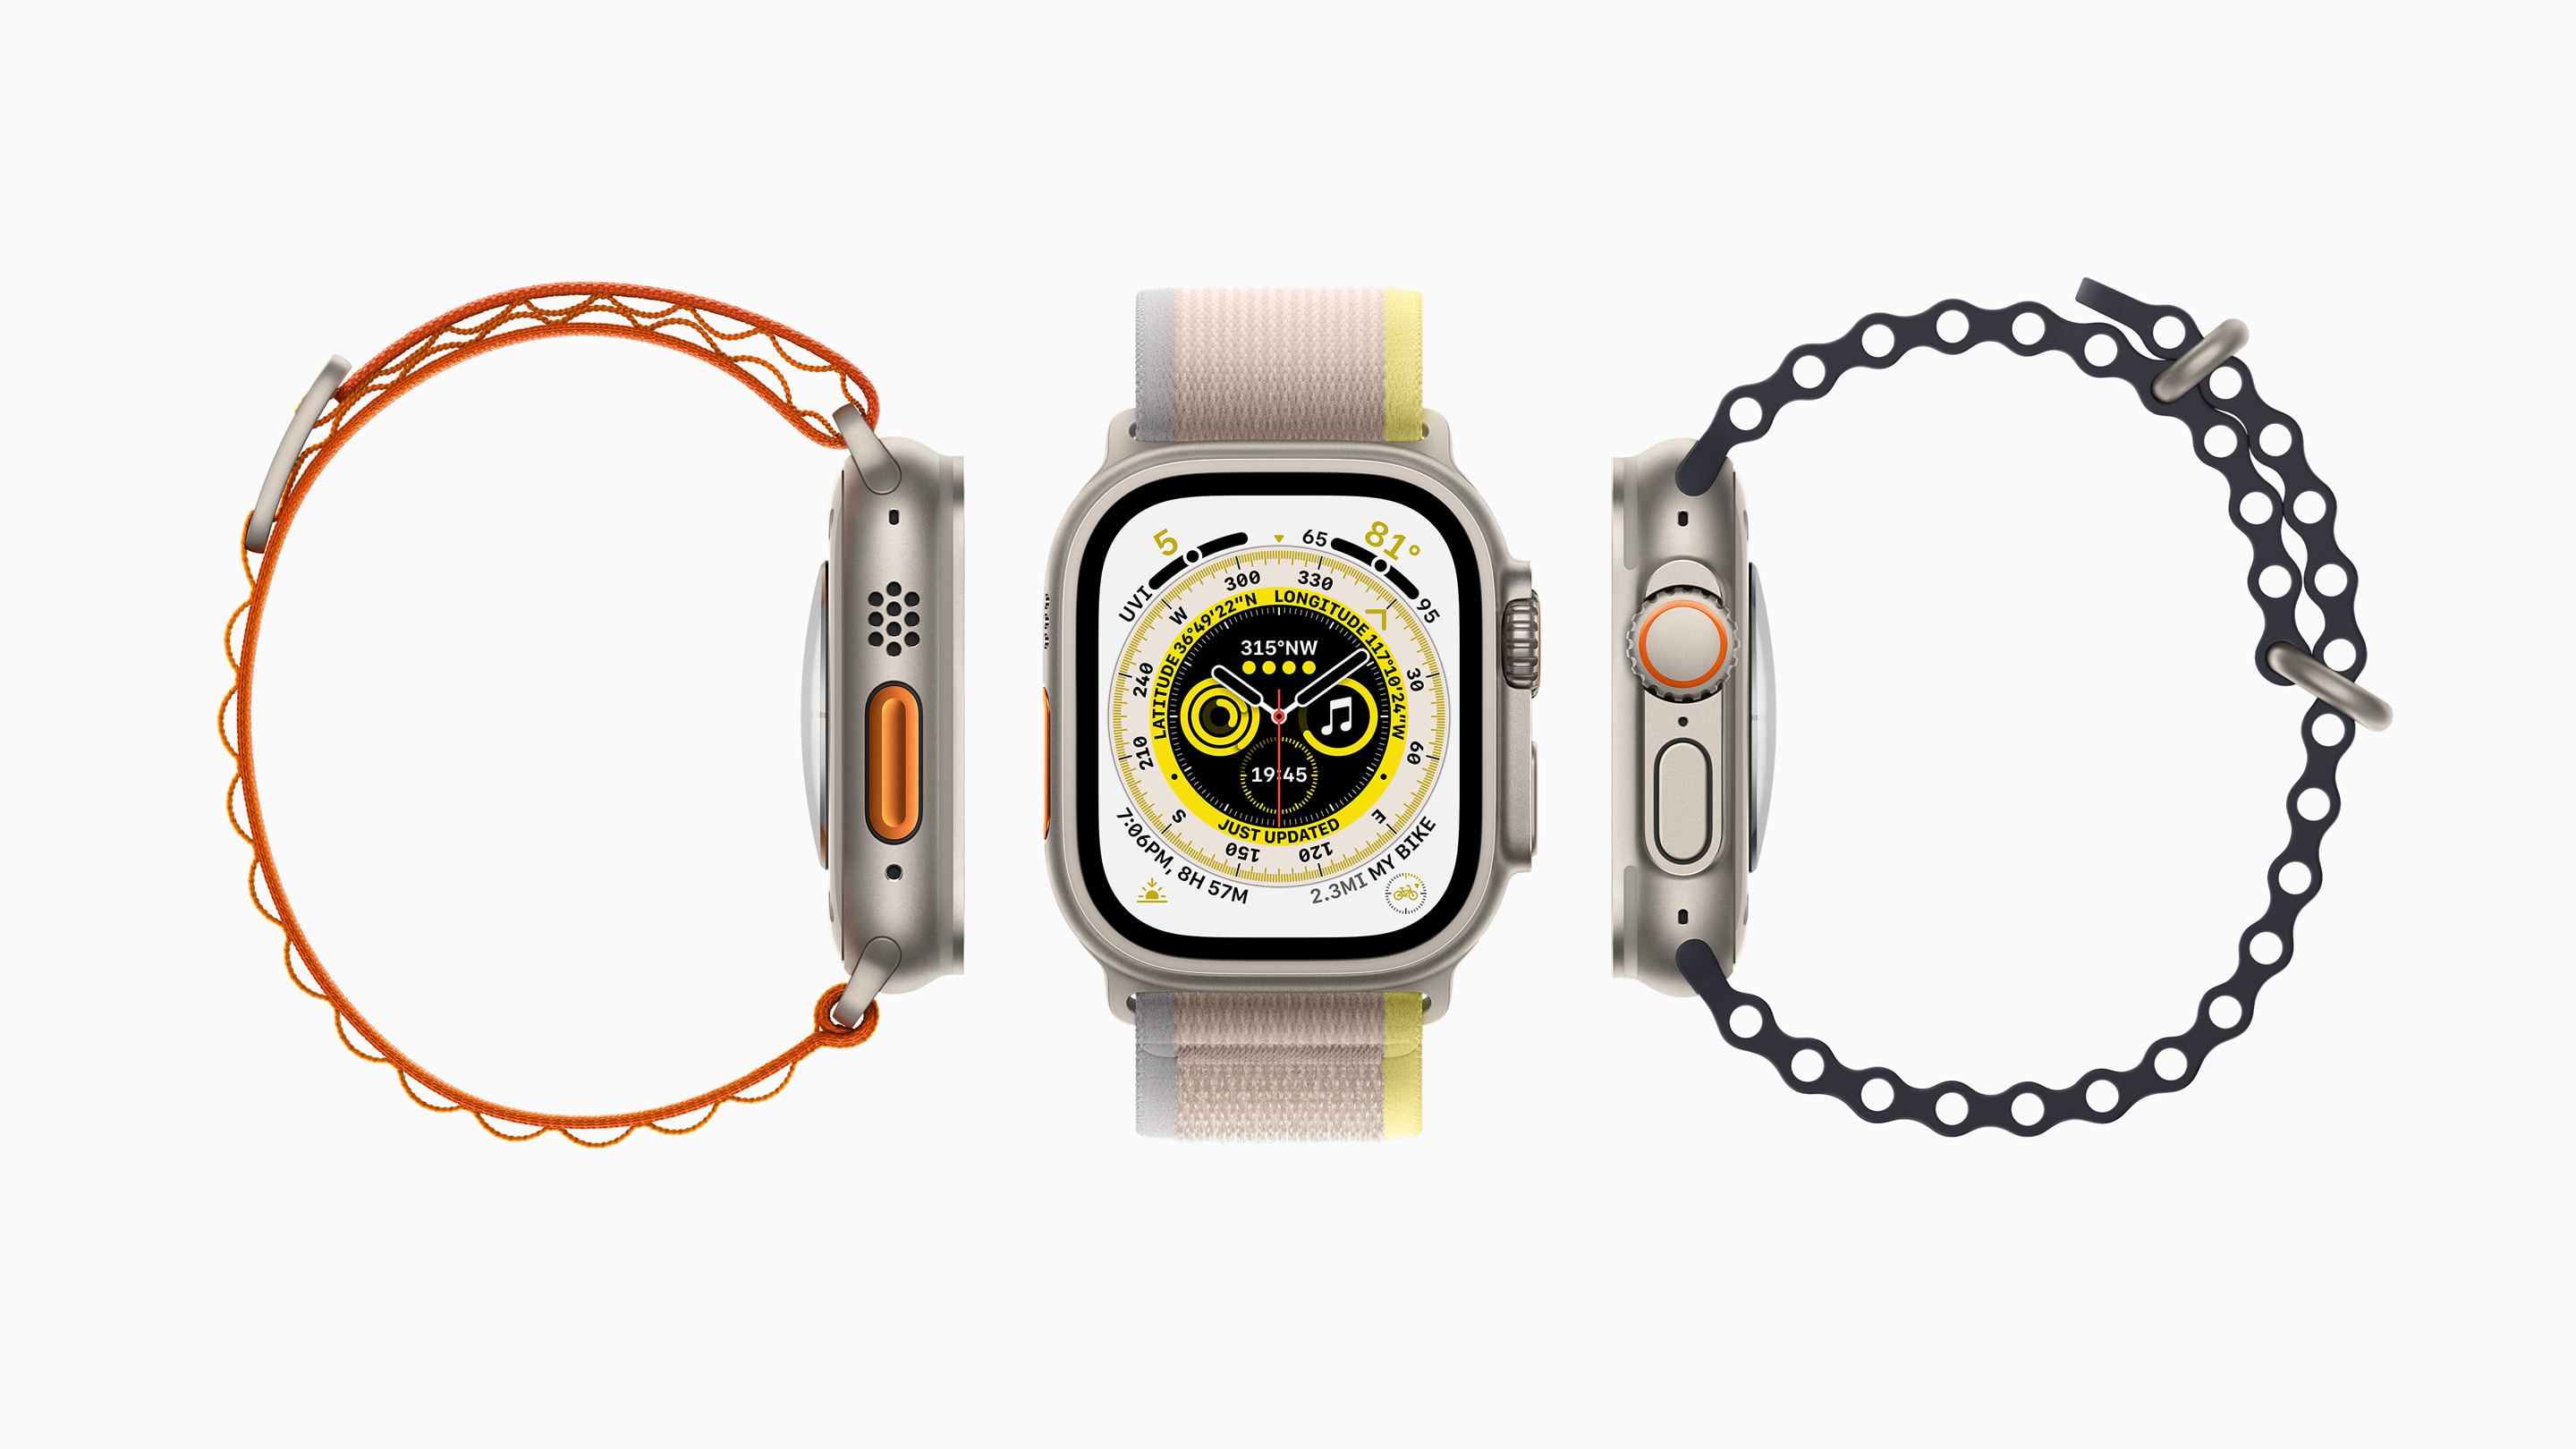 I may have been wrong about the Apple Watch Ultra